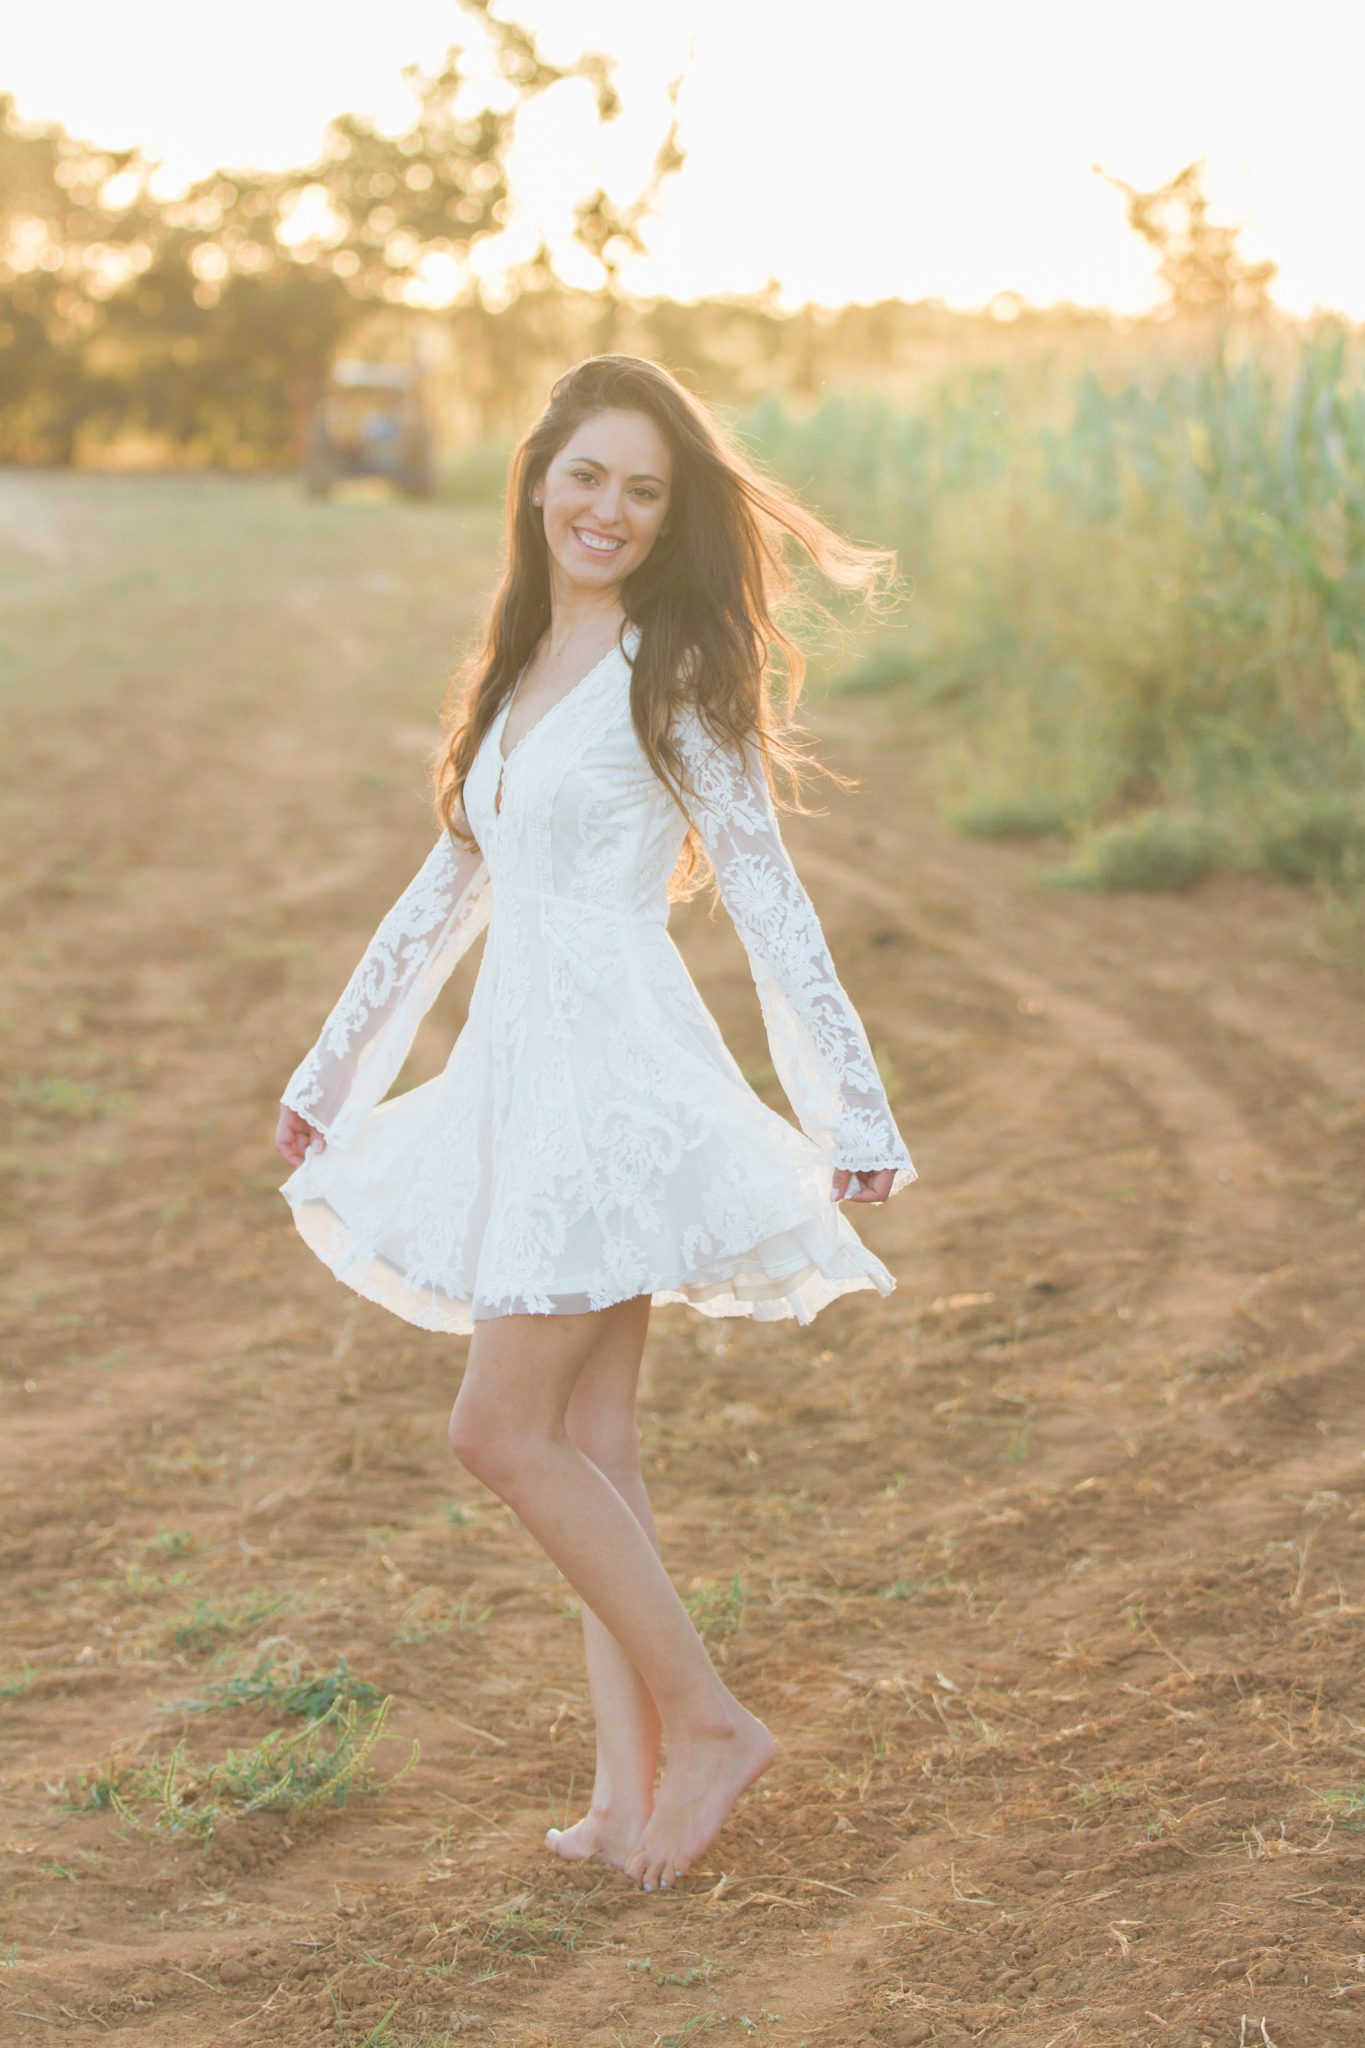 sundress in the fall, how to wear summer clothes in the fall, backlight, cornfield, fall outfit ideas